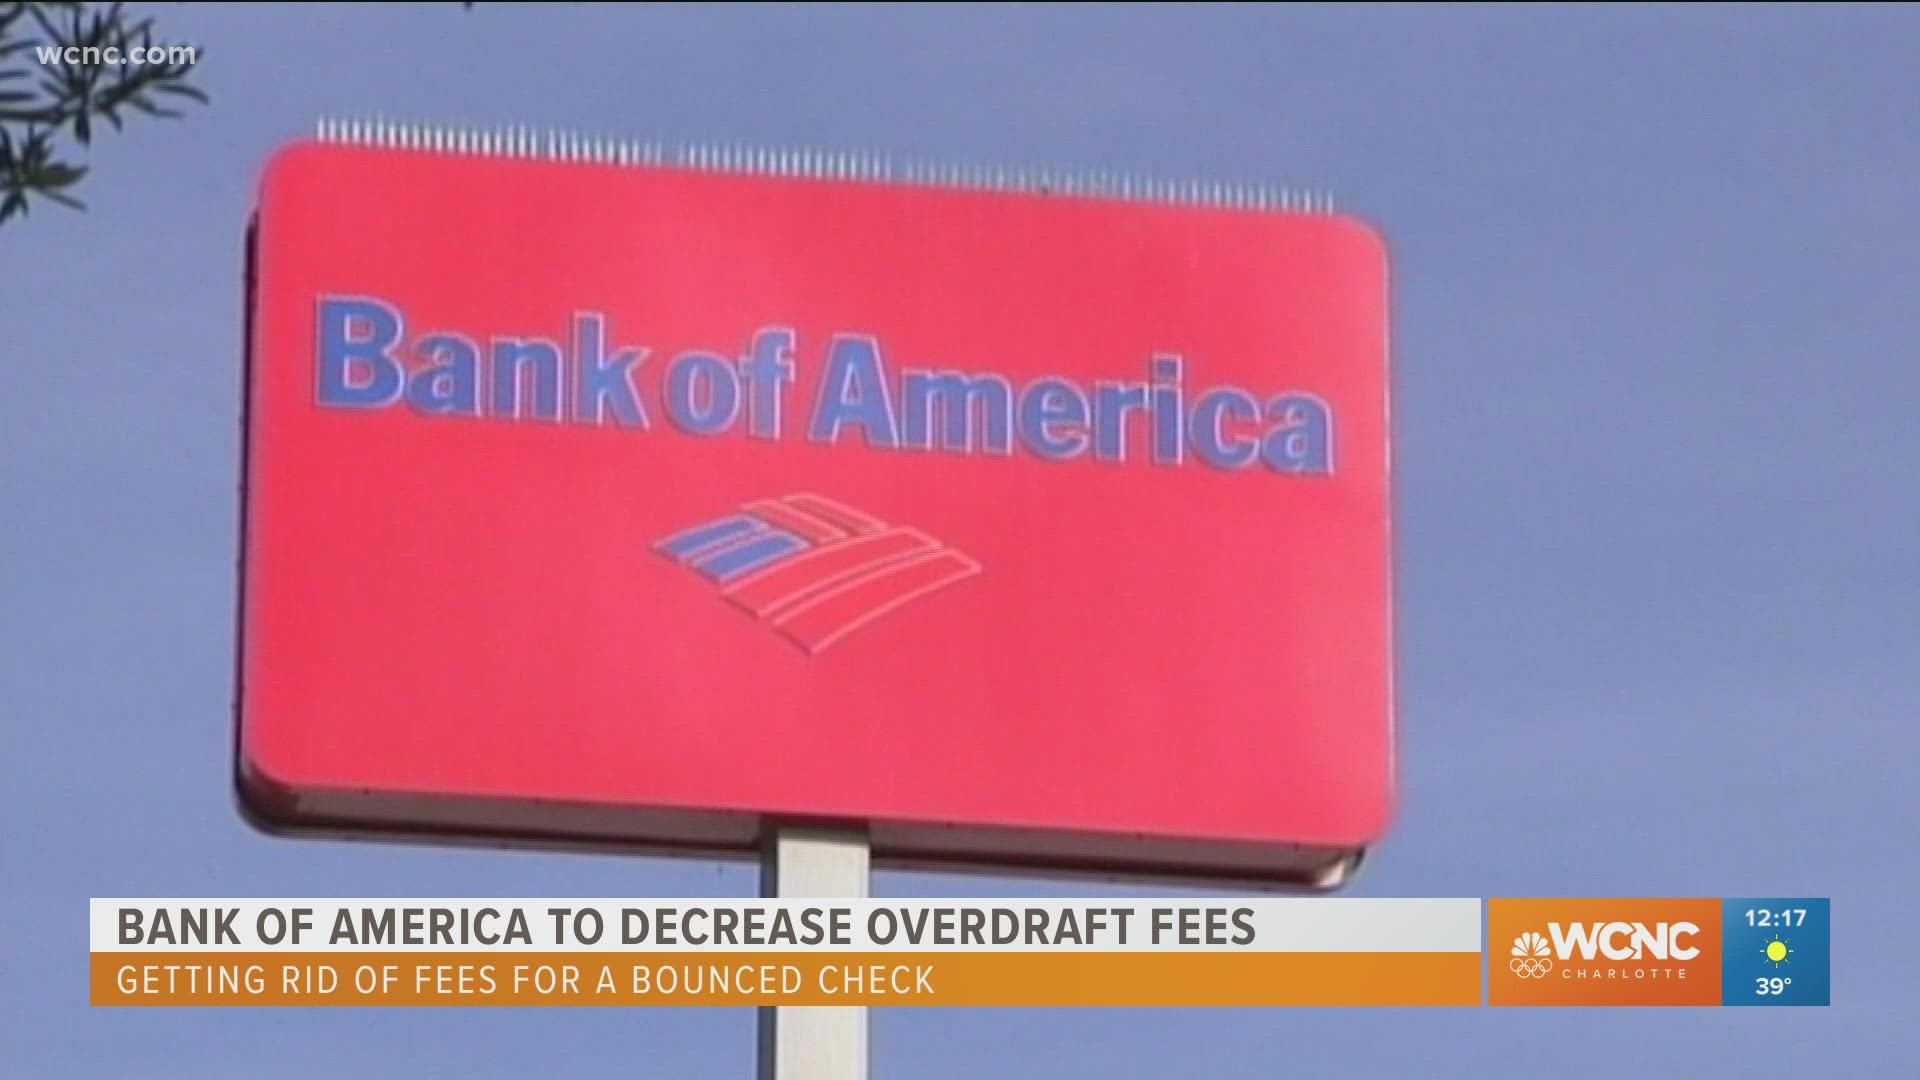 While Bank of America is one of the U.S.'s largest banks, it remains unclear if others will follow their lead in reducing overdraft fees